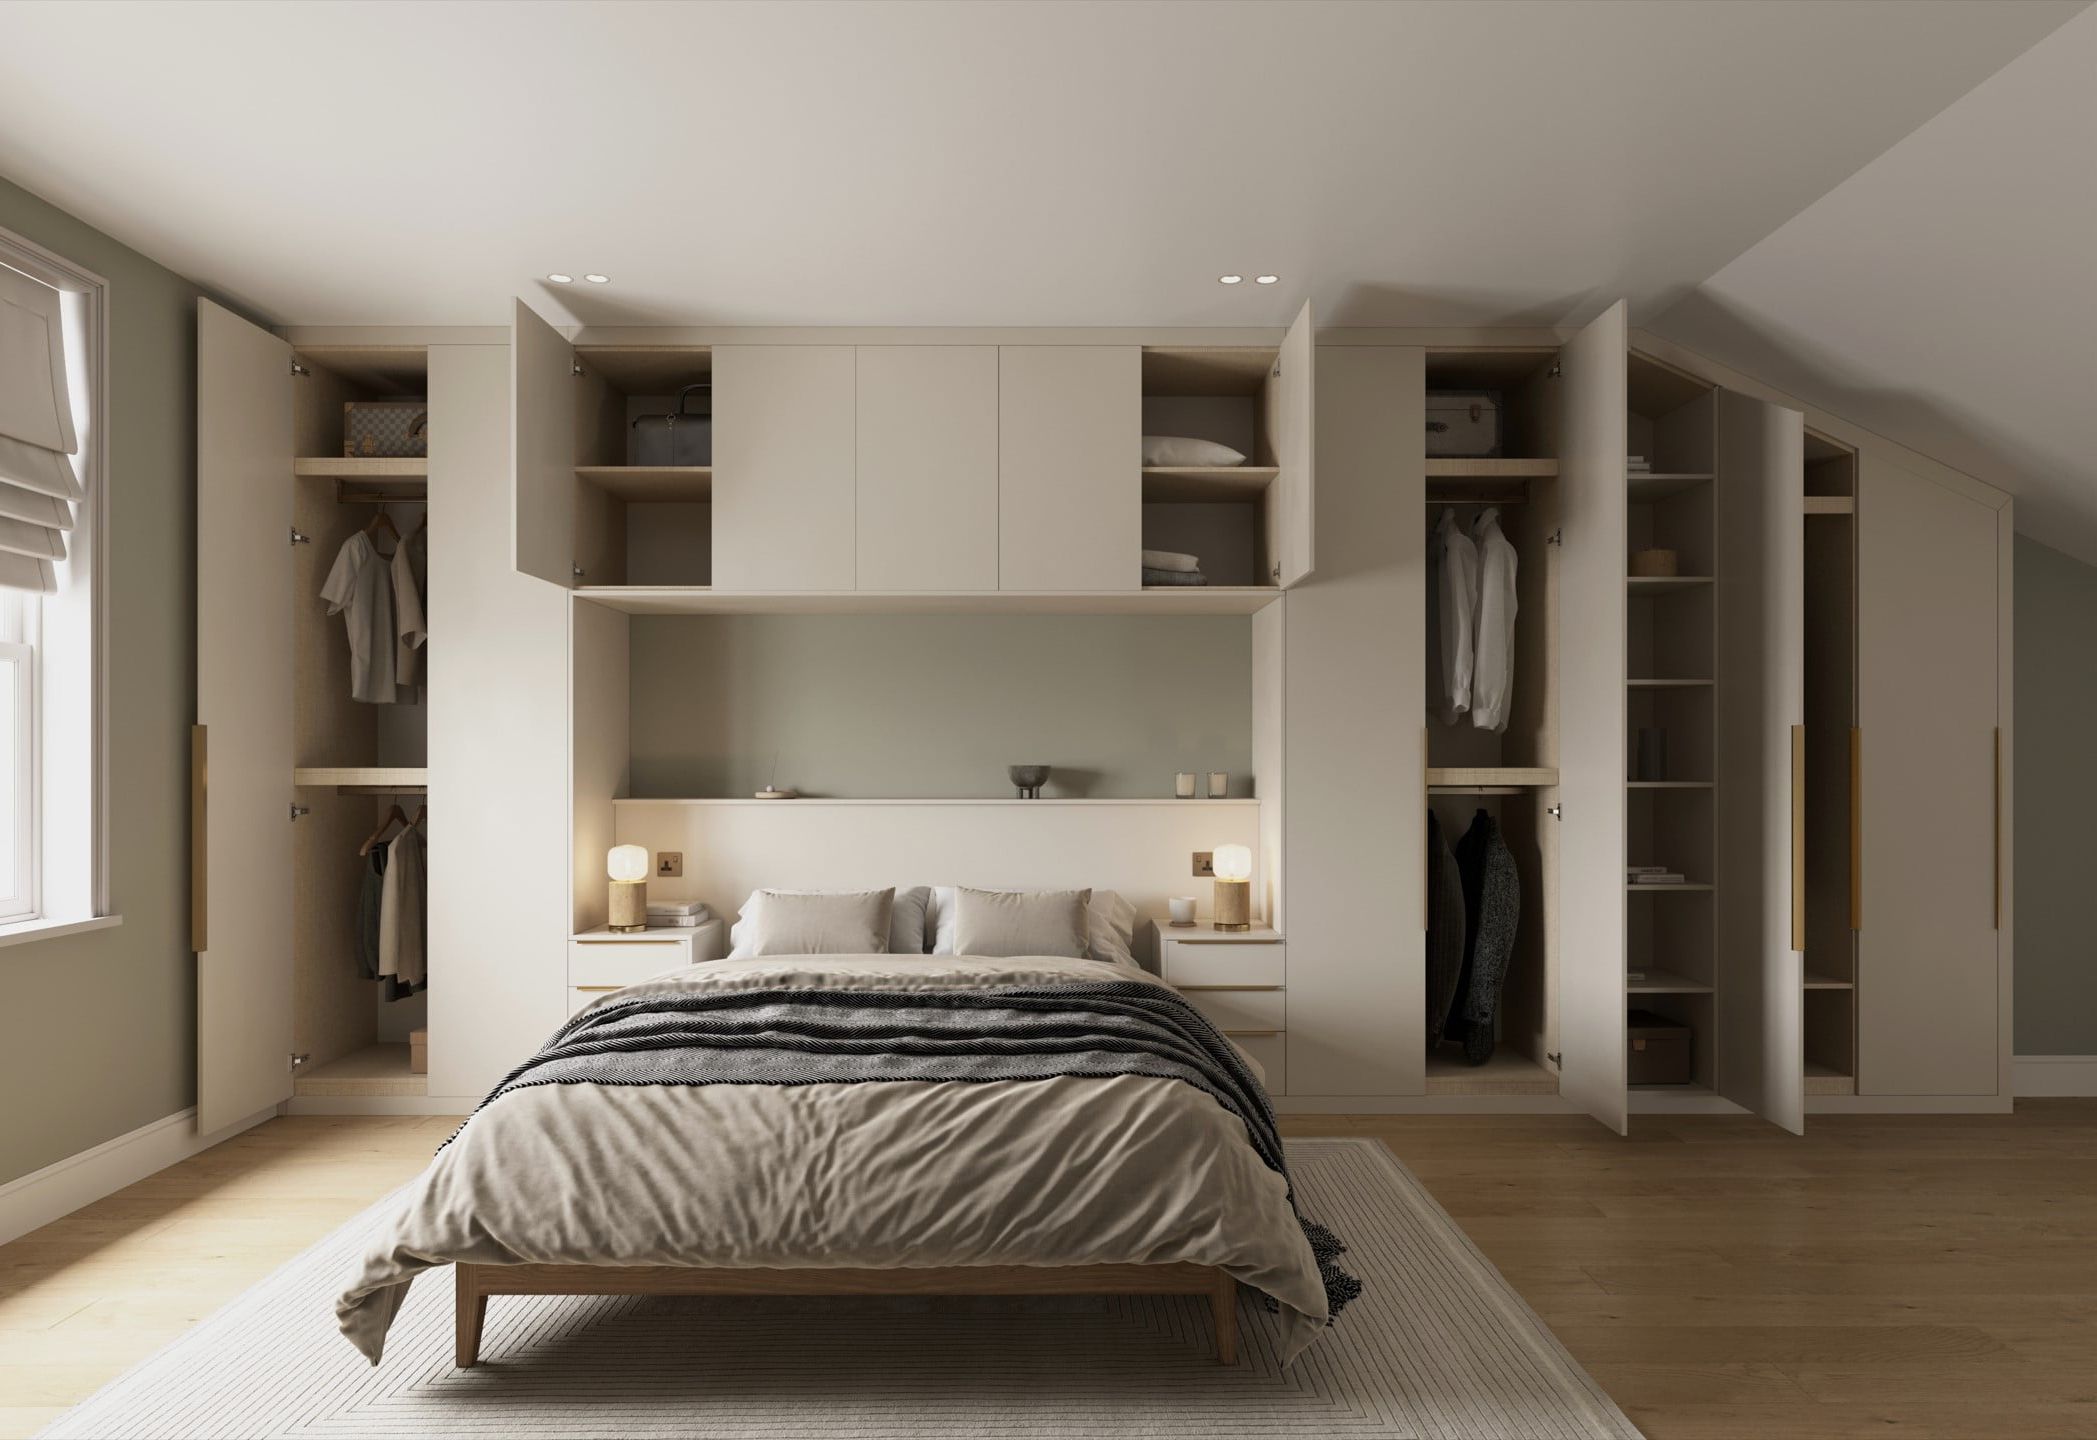 Overbed Fitted Wardrobes And Storage Units, Bespoke Overhead Storage Regarding Overbed Wardrobes (View 9 of 20)